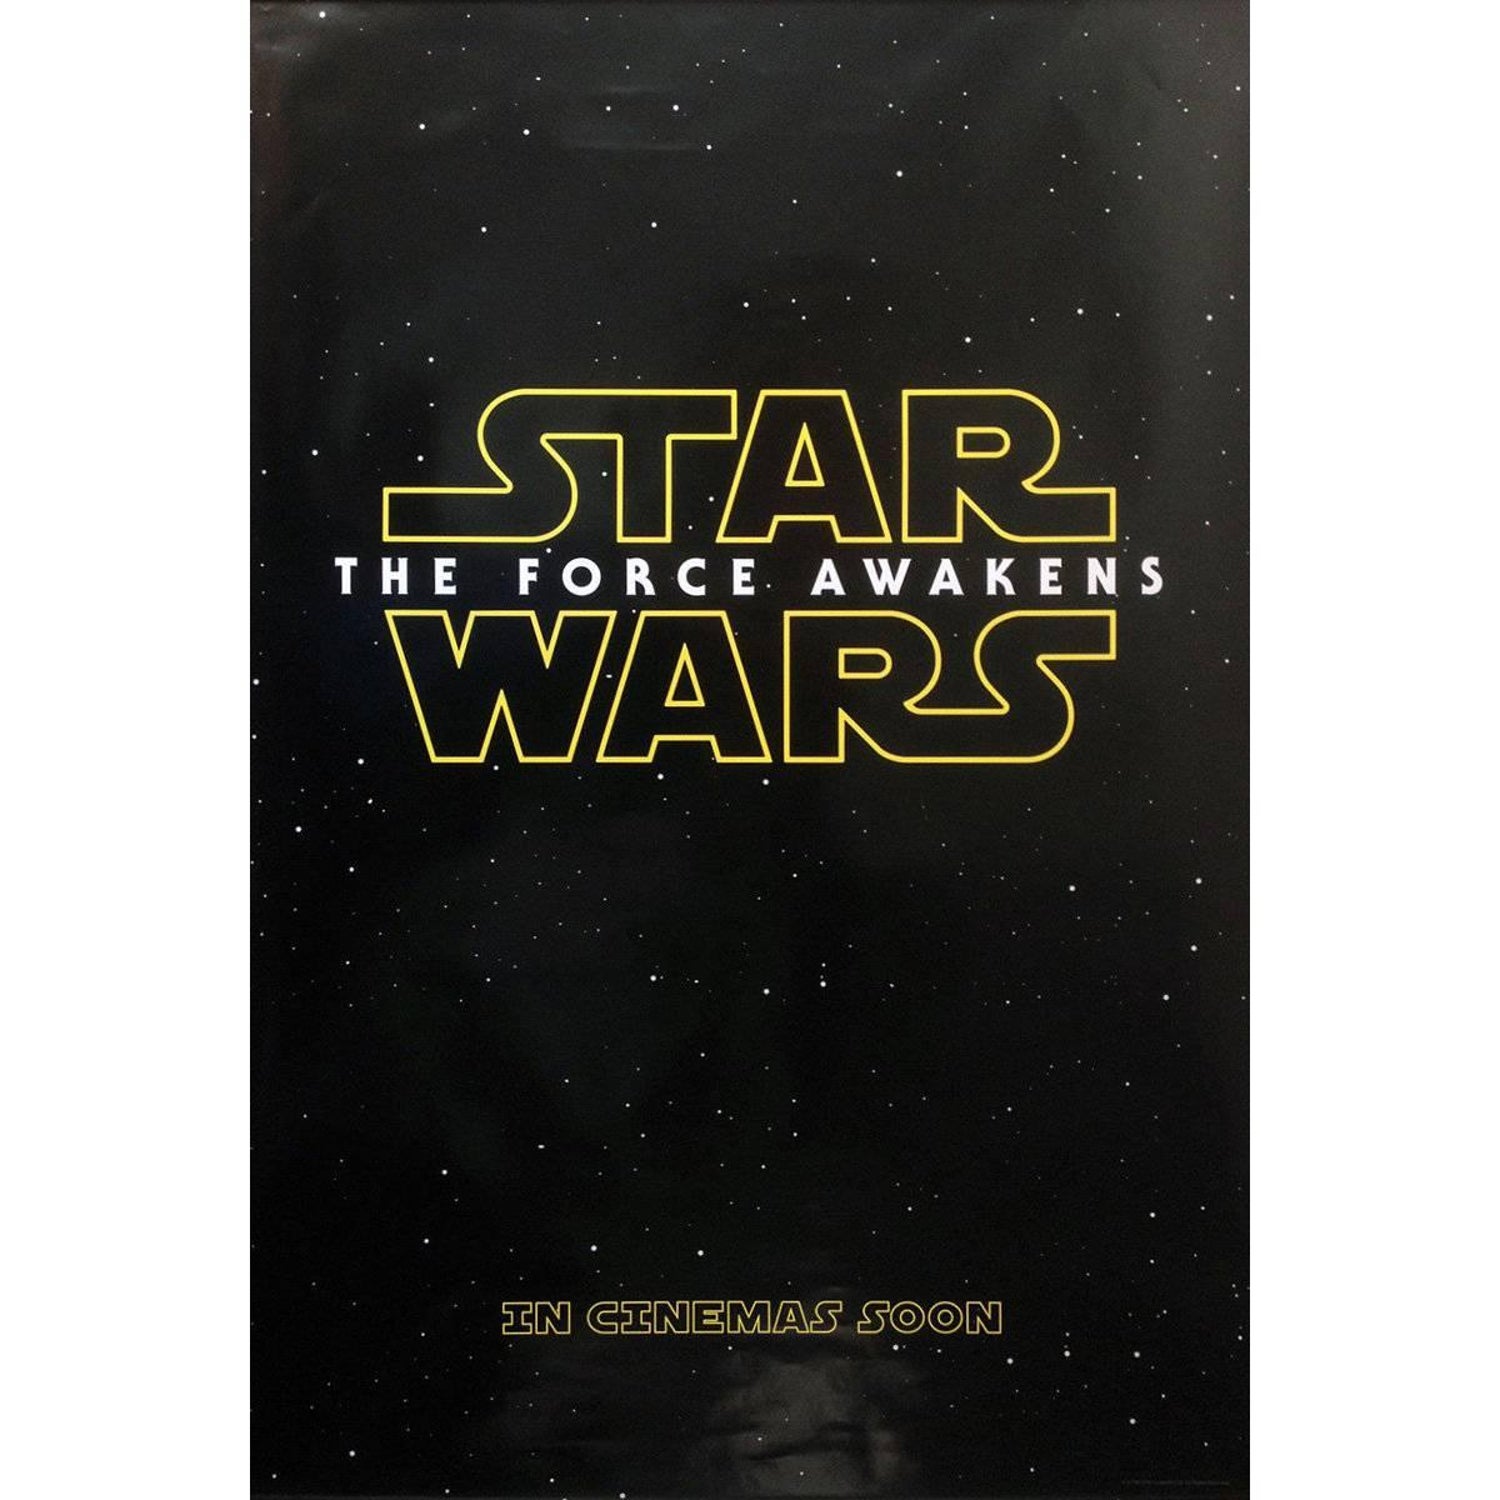 Star Wars: The Force Awakens", Film Poster, 2015 For Sale at 1stDibs